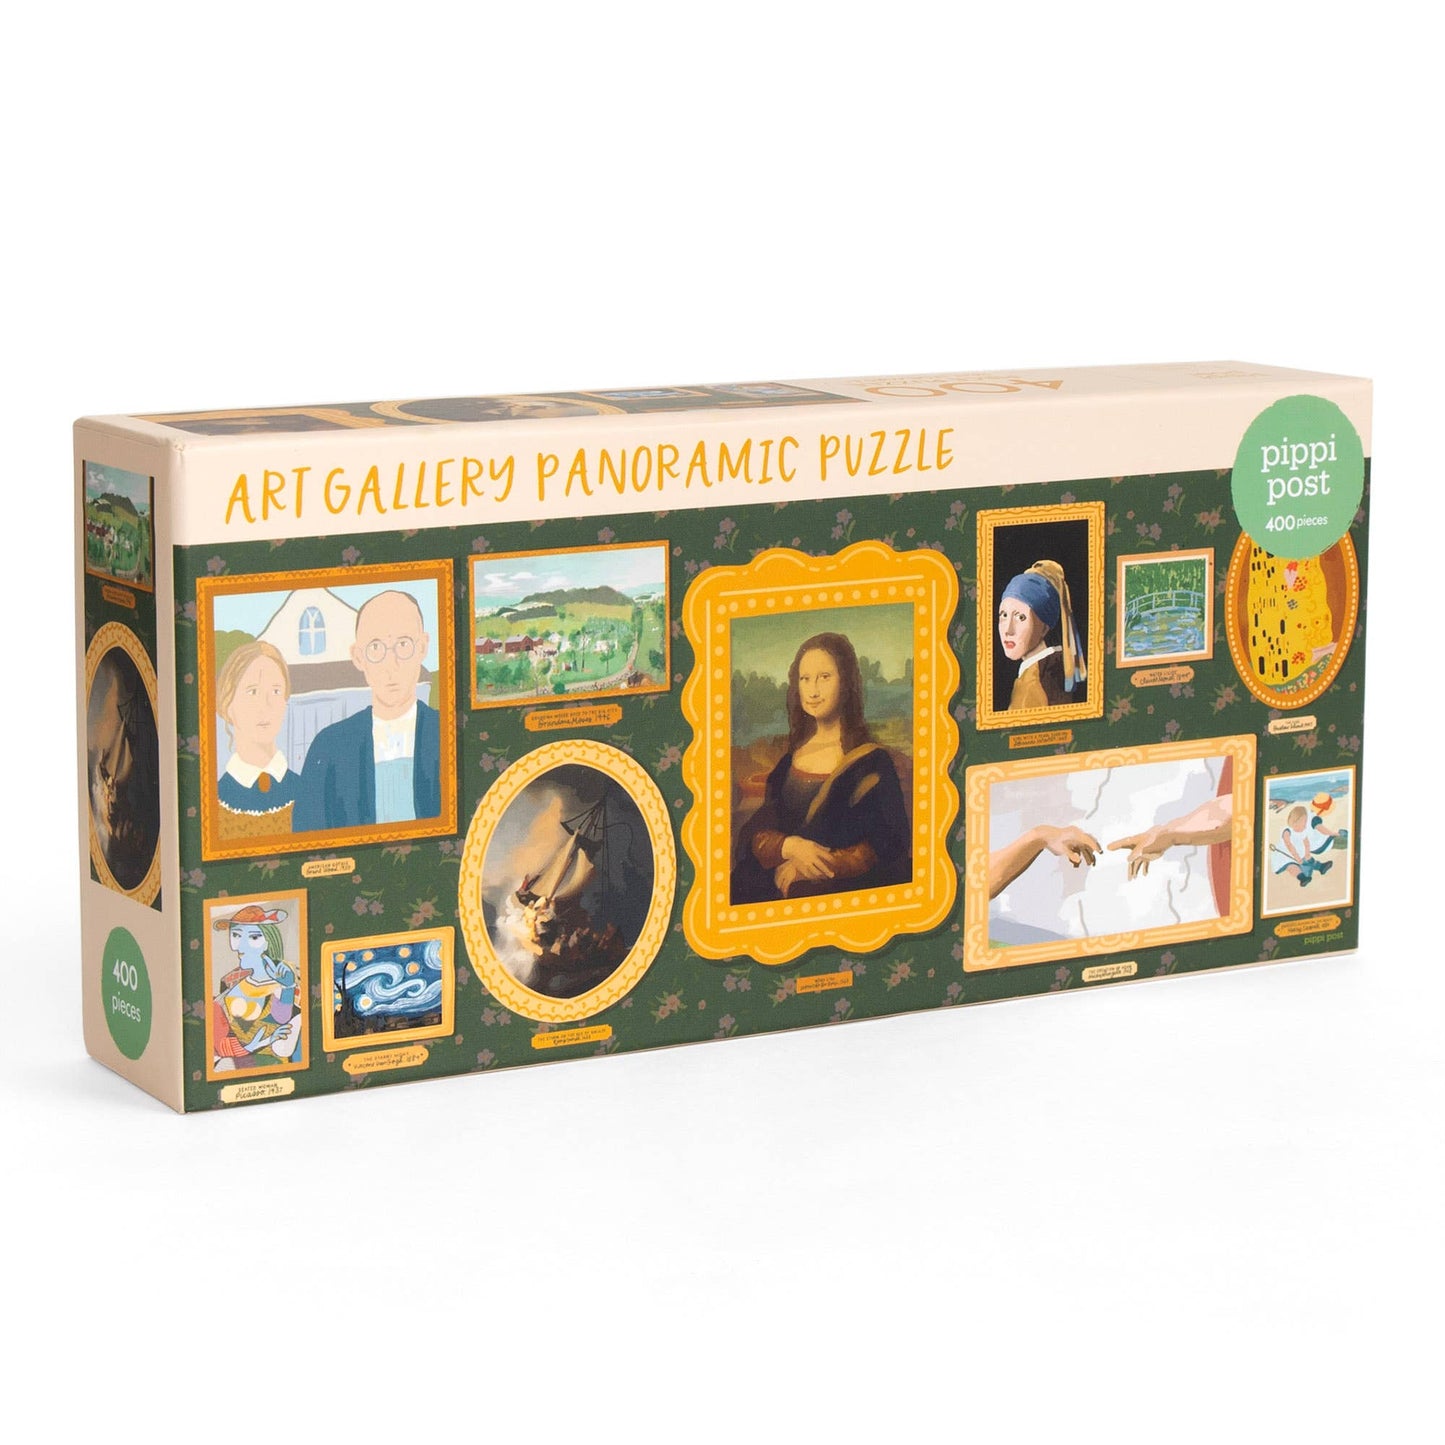 Famous Works of Art - 400 Piece Panoramic Jigsaw Puzzle